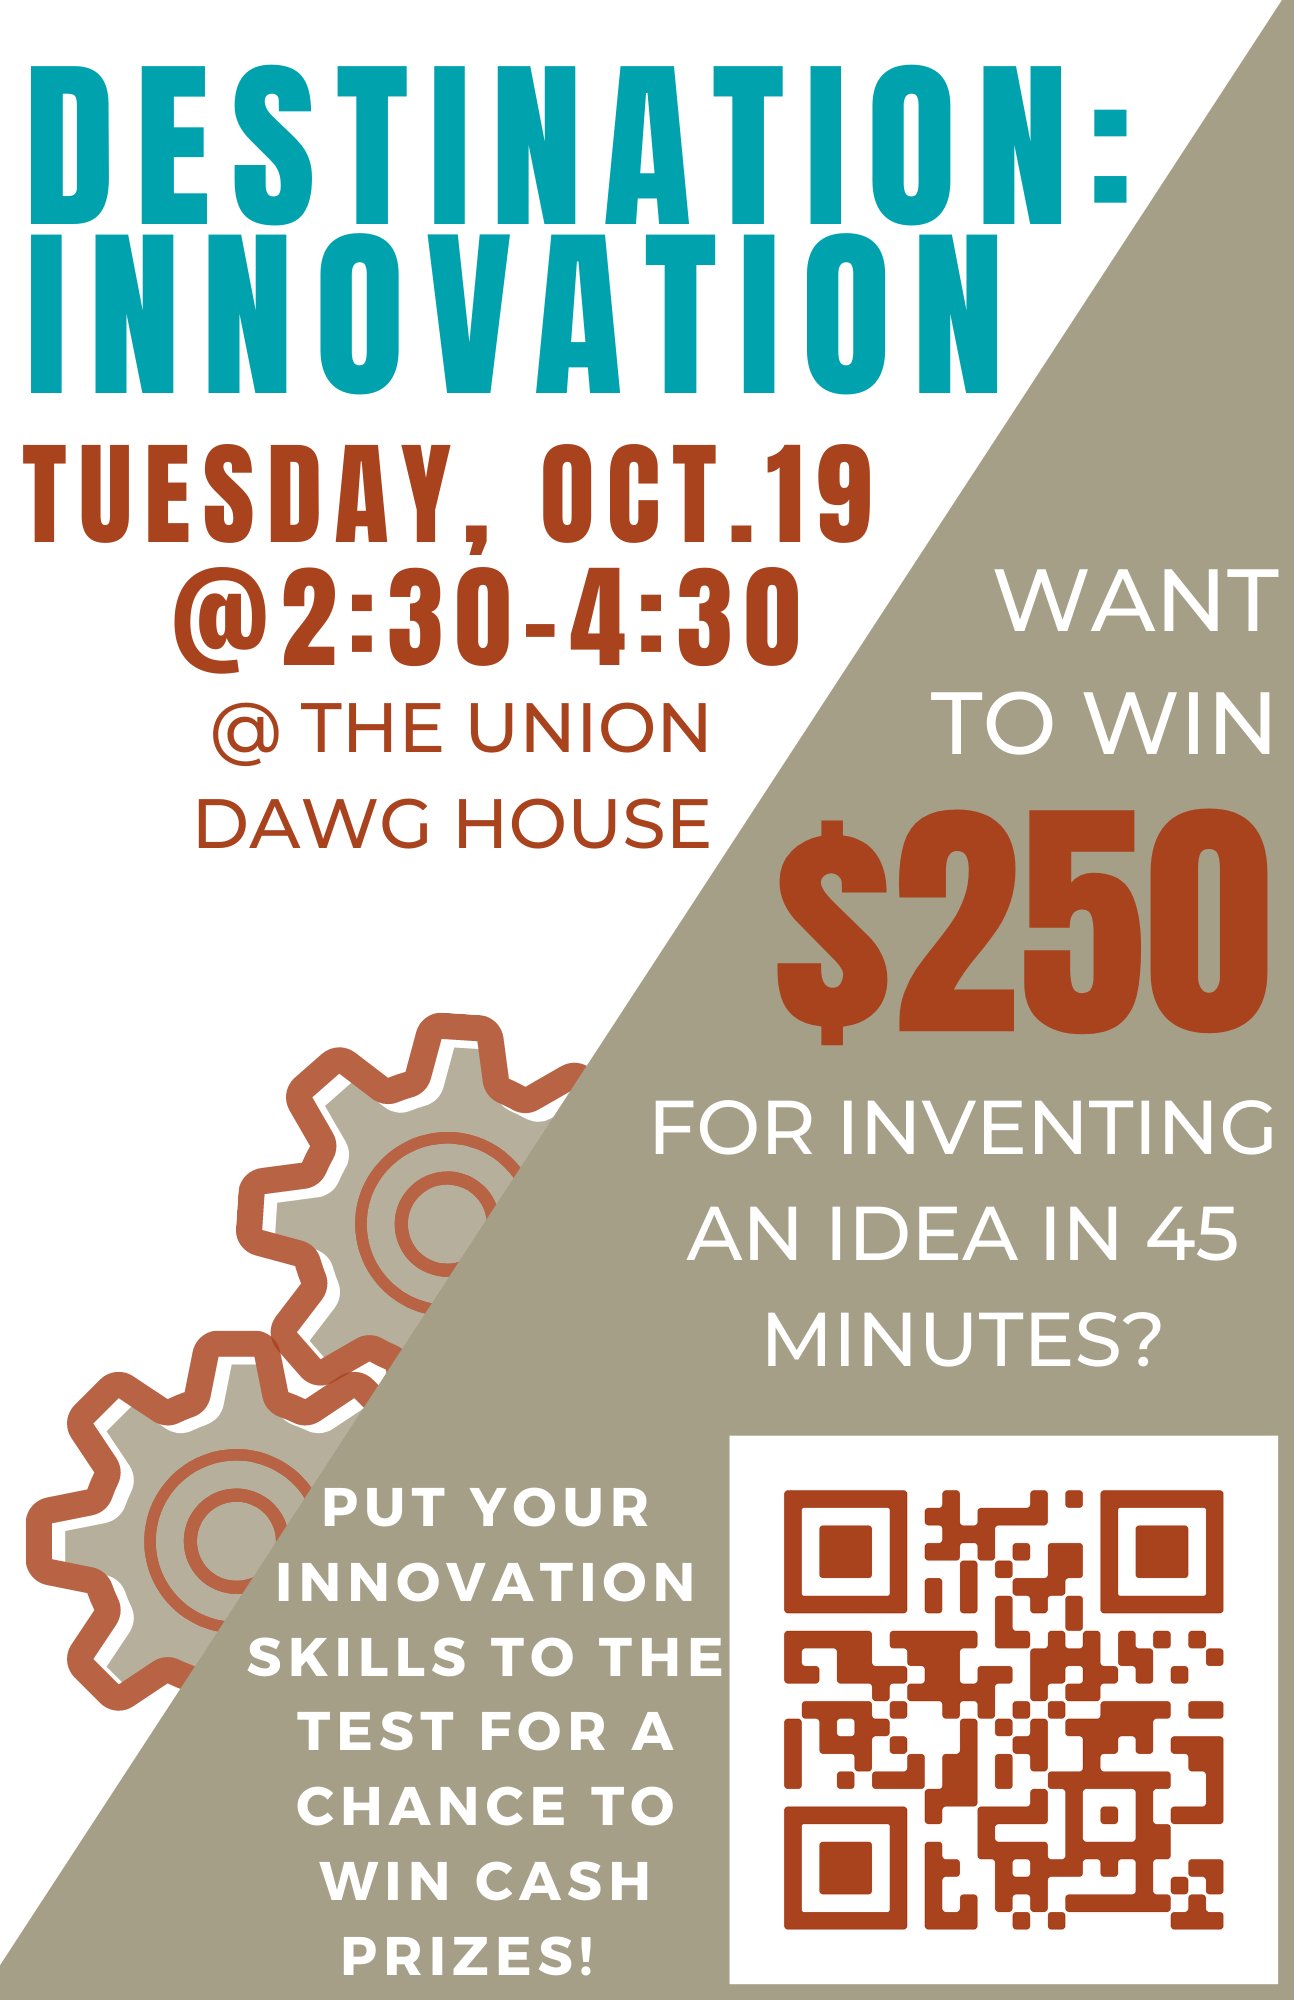 Teal, tan and orange graphic for the MSU Center for Entrepreneurship and Outreach's "Destination: Innovation" Inventor's Challenge